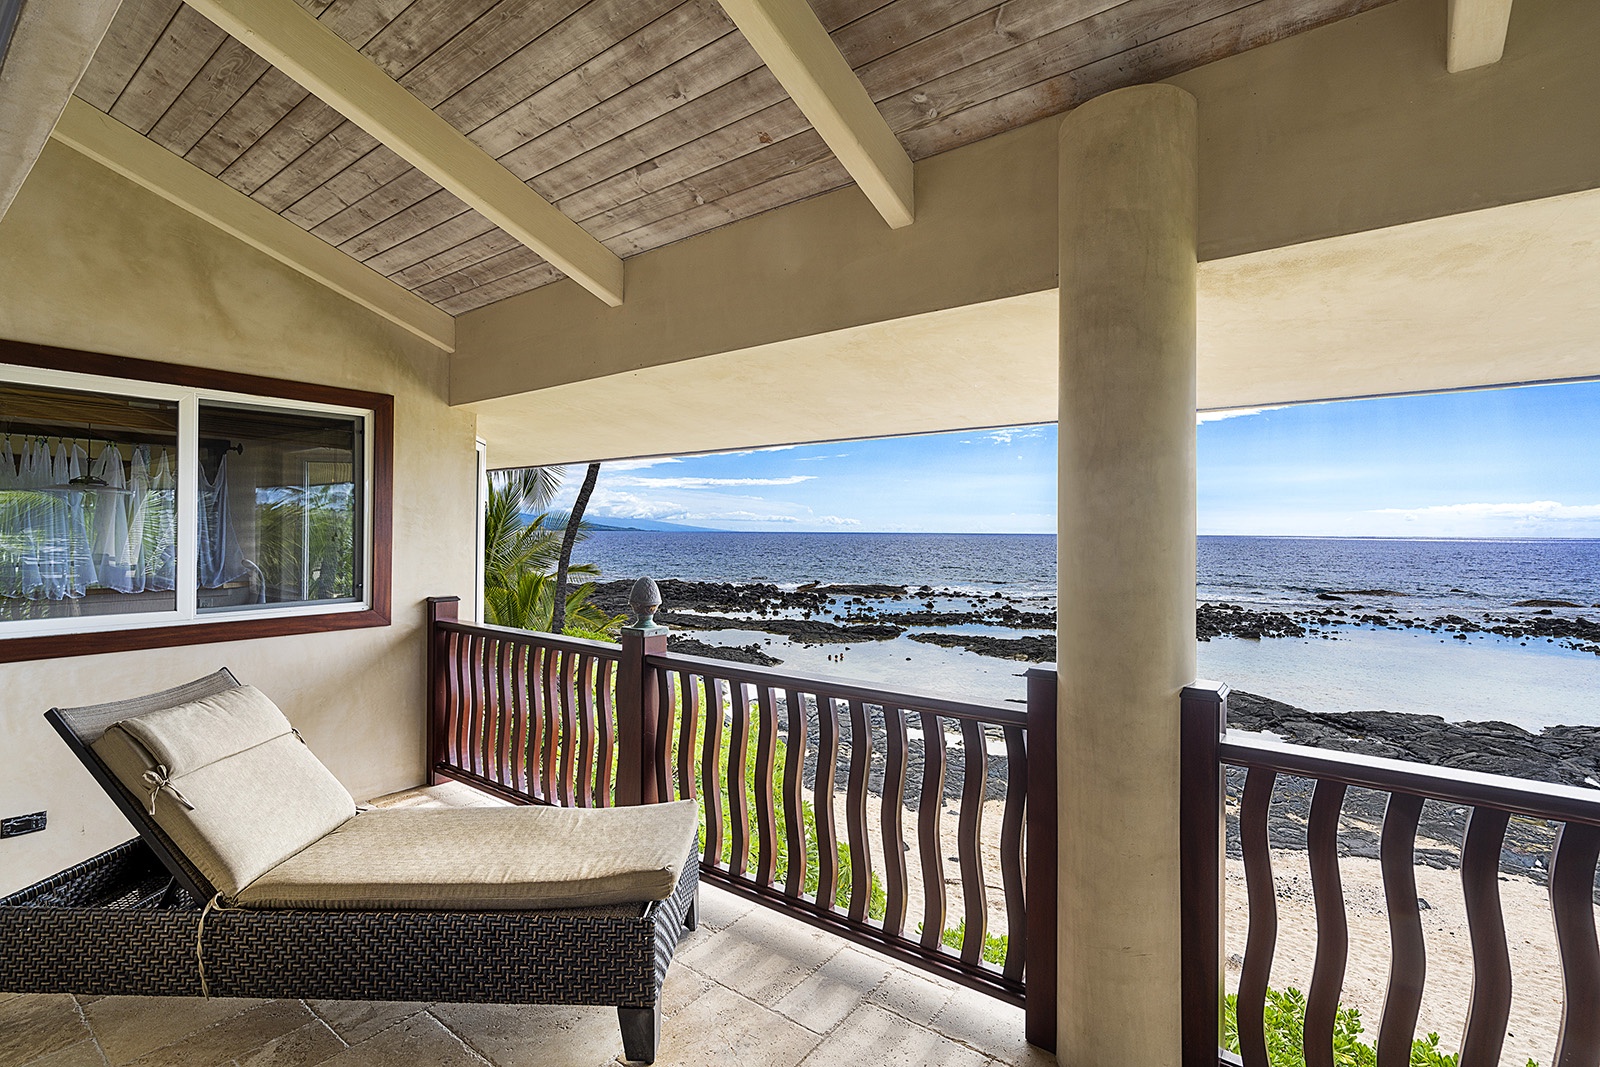 Kailua Kona Vacation Rentals, Mermaid Cove - Private Lanai on the top floor off the primary bedroom.